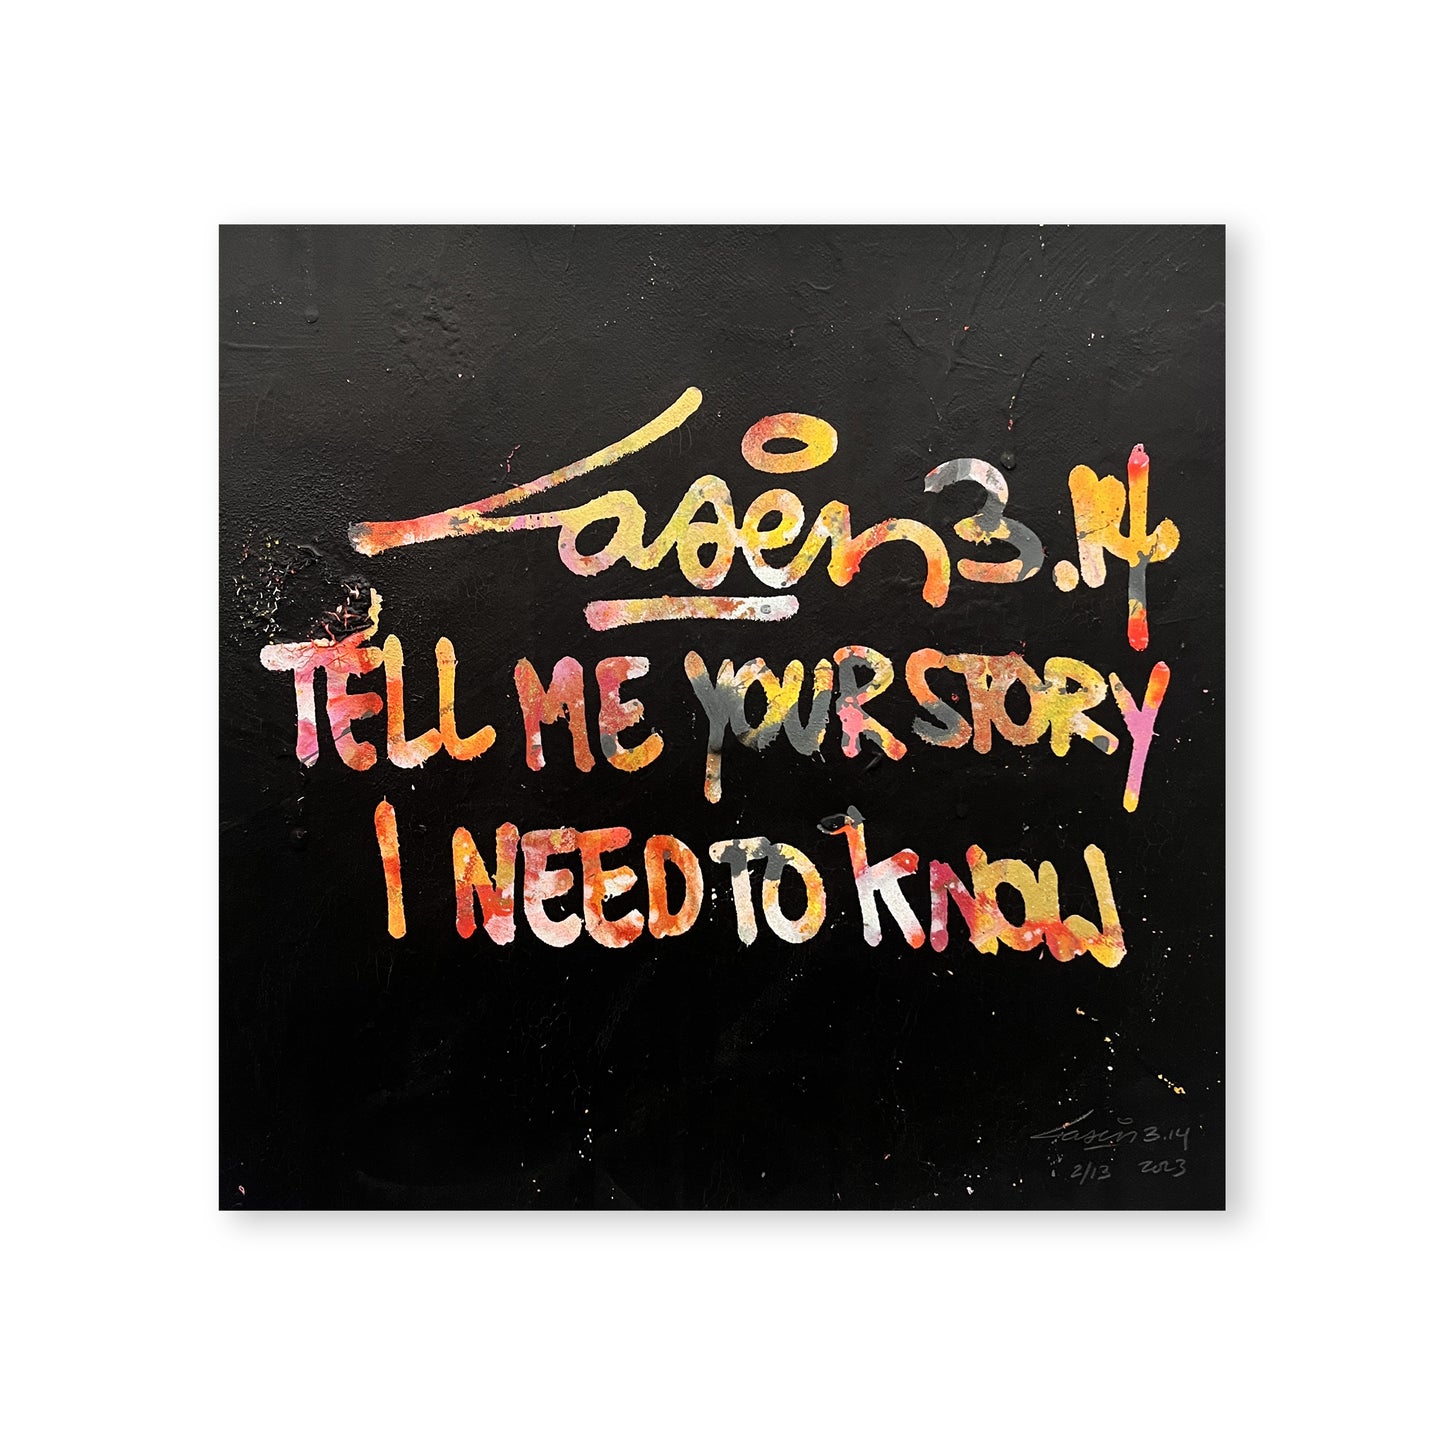 Tell Me Your Story I Need To Know 2/12